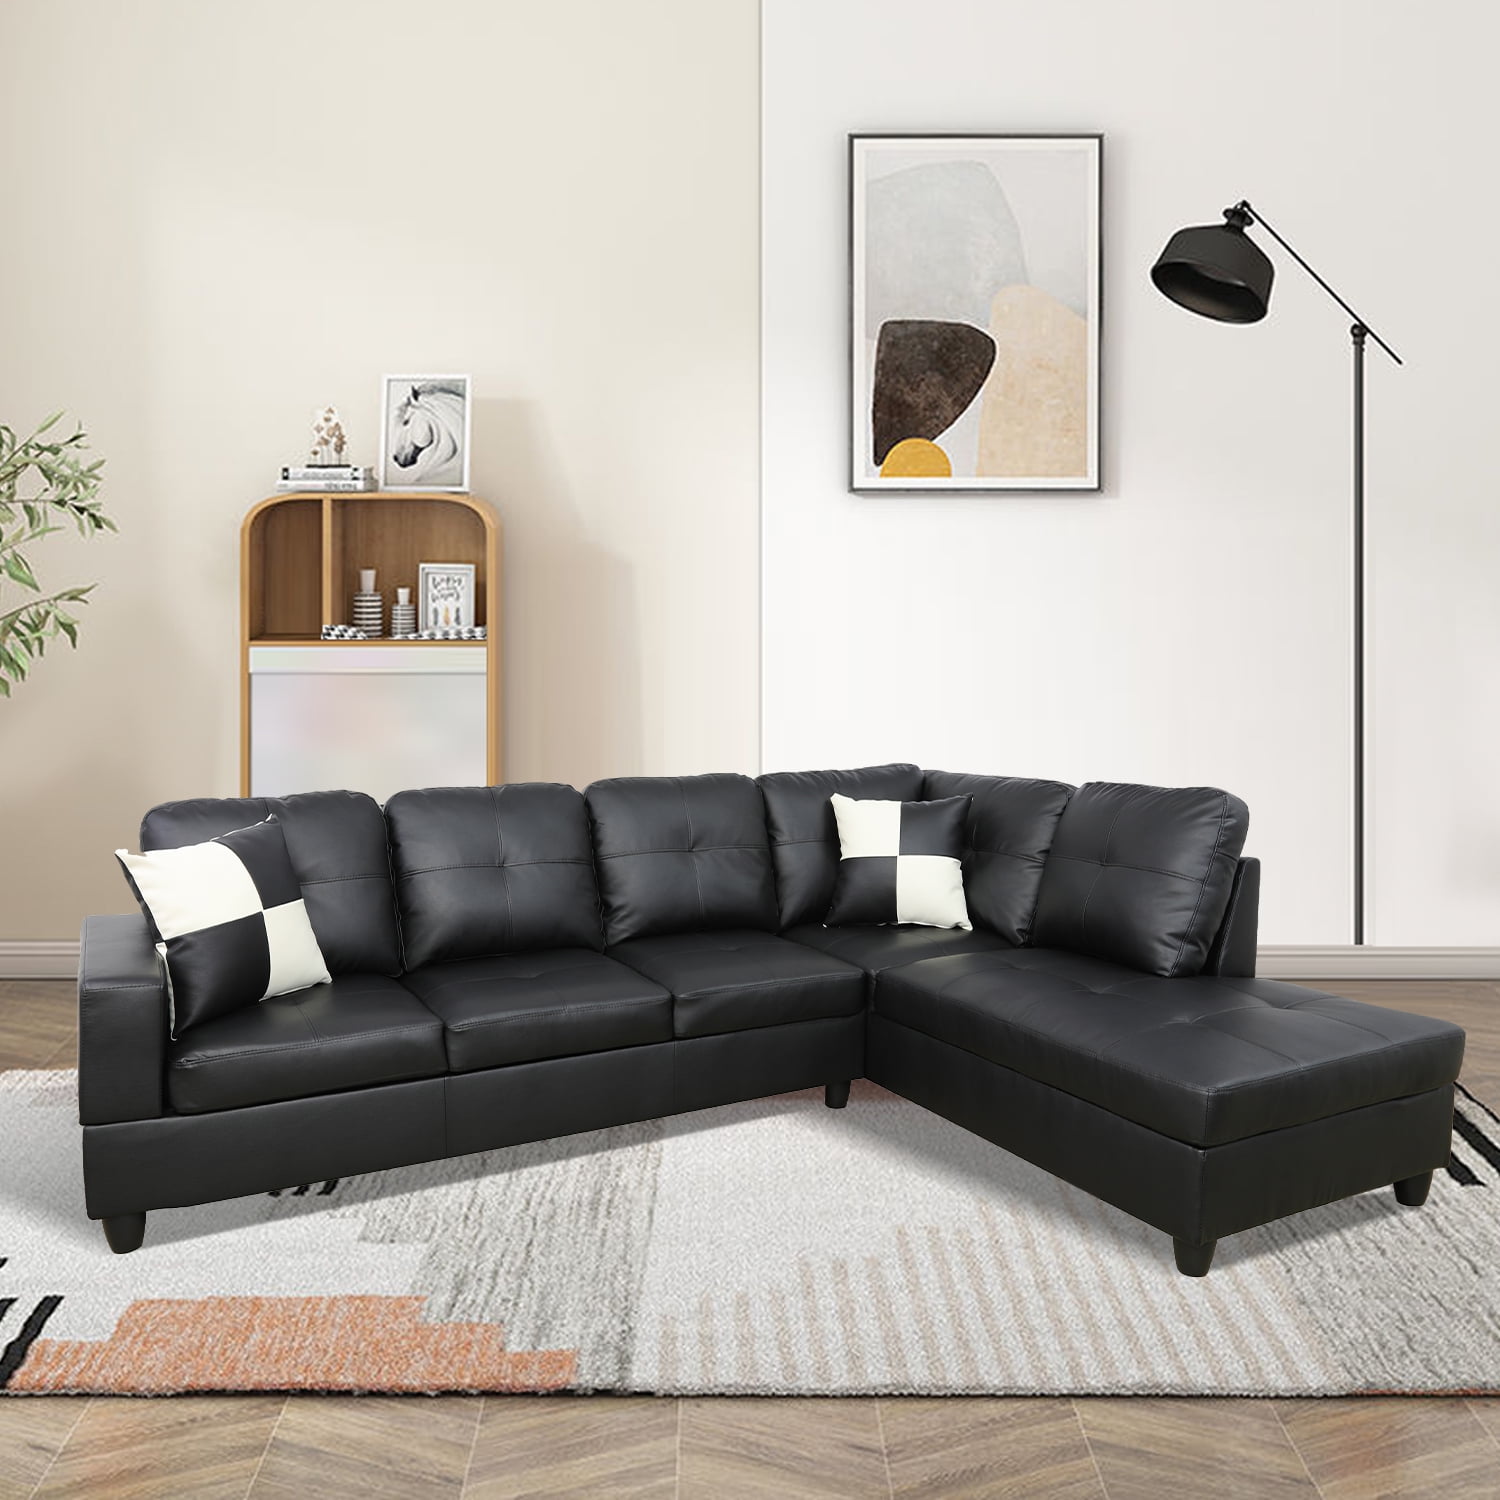 Hommoo Semi PU Leather Sectional Sofa, L Shaped Couch, Sectional Sofa ...